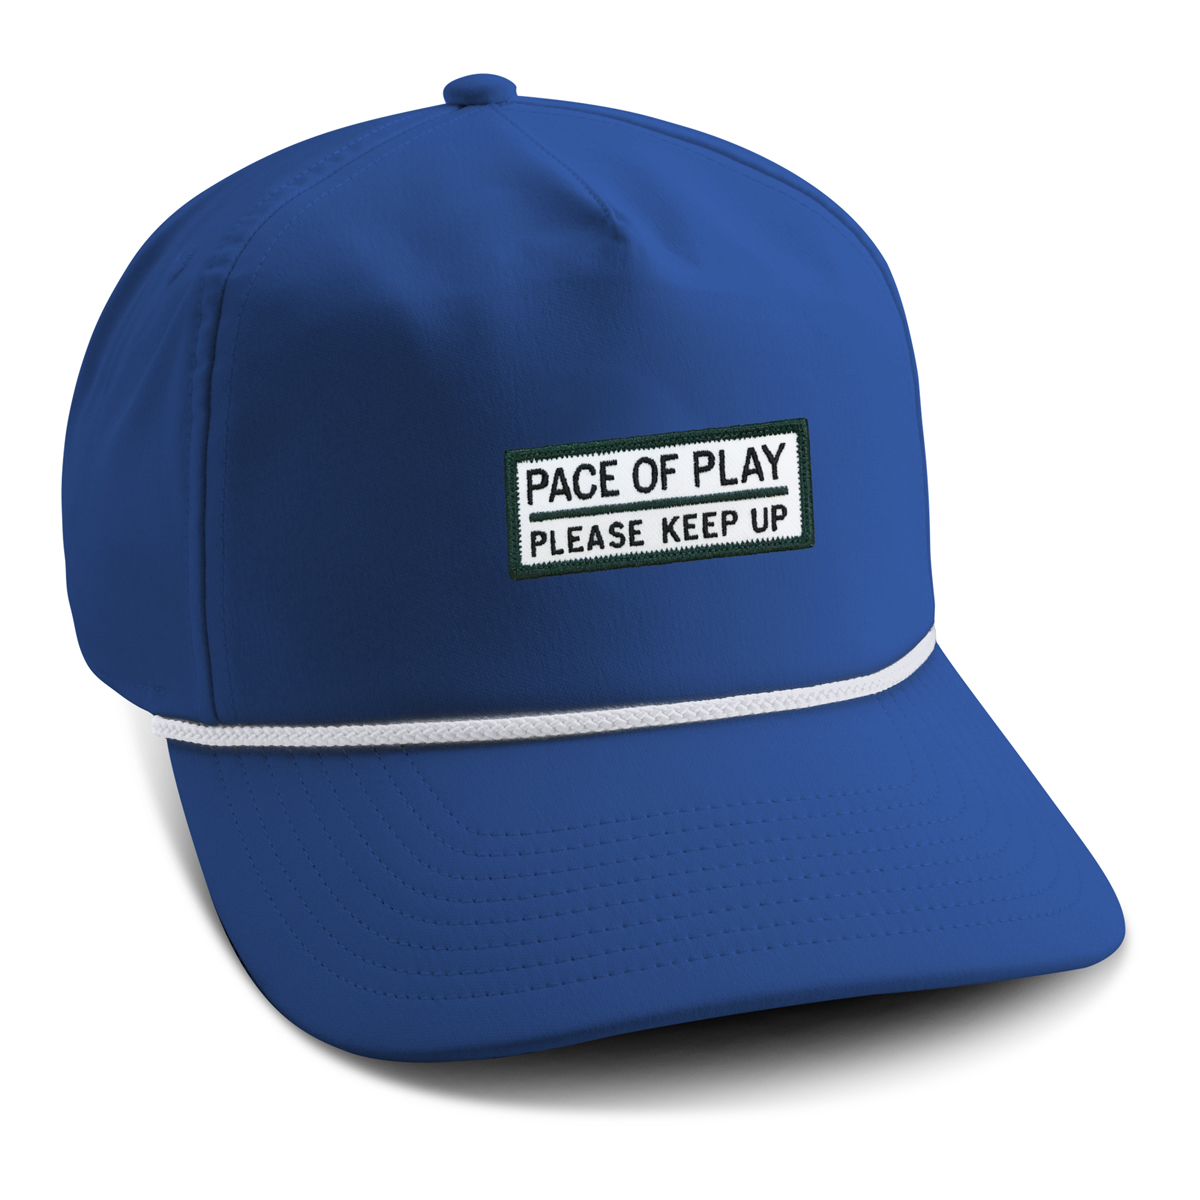 The Pace of Play Performance Rope Cap